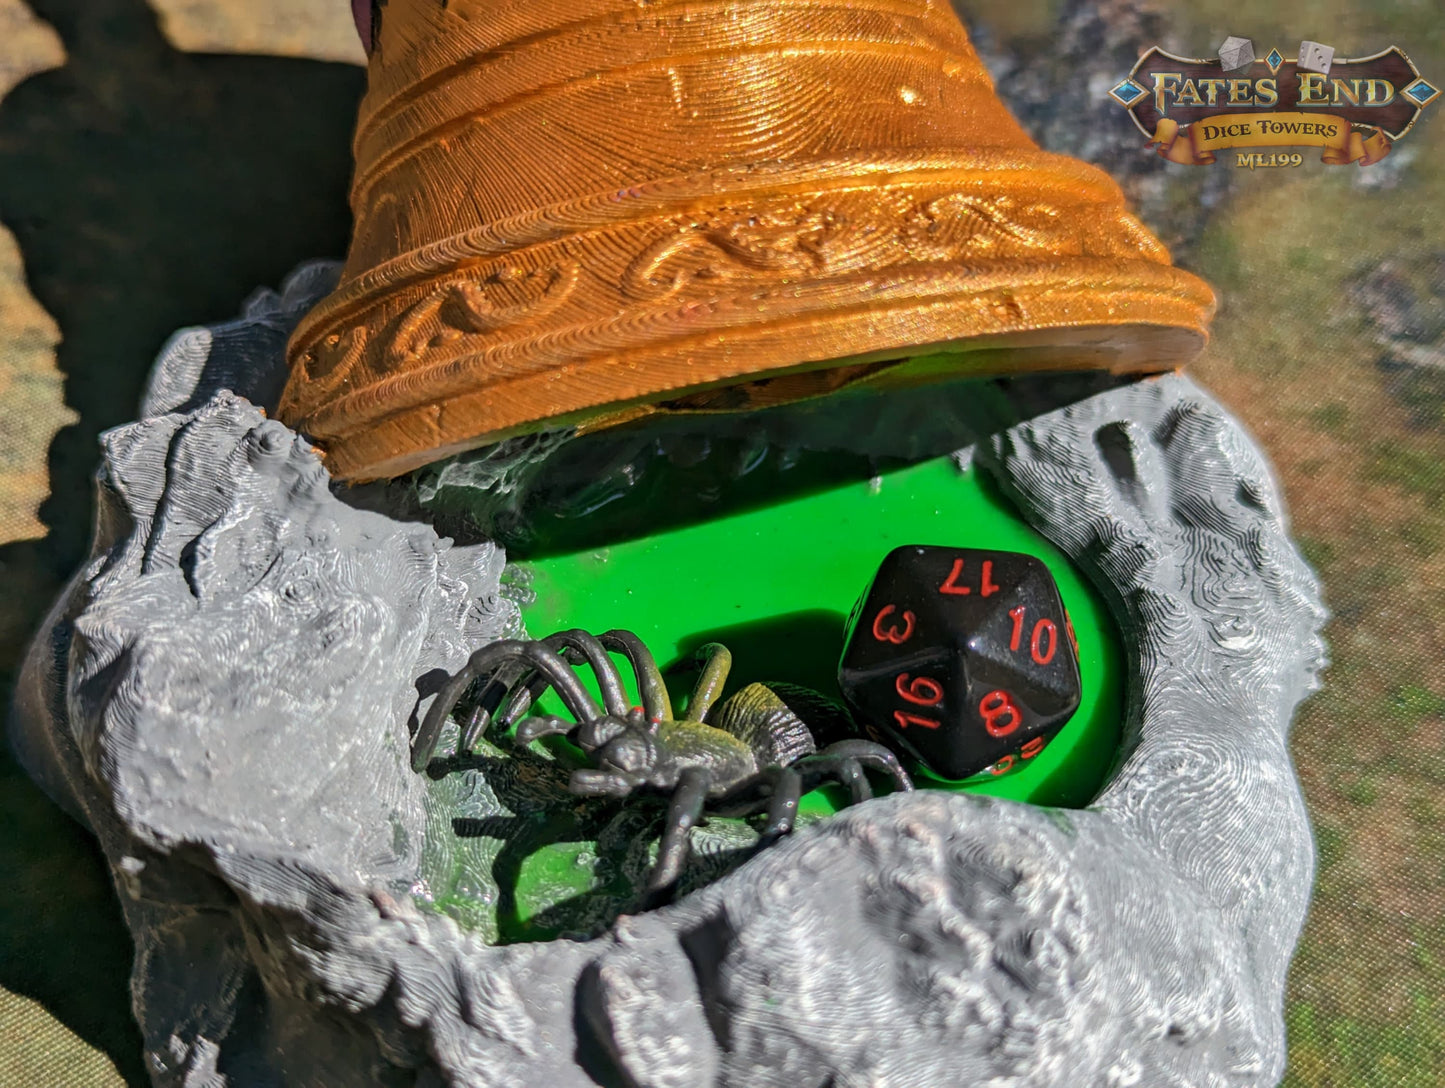 Bell of Bugs Dice Tower - Fate's End Collection - Summon Nature's Melodies and Mysteries with Every Ring.